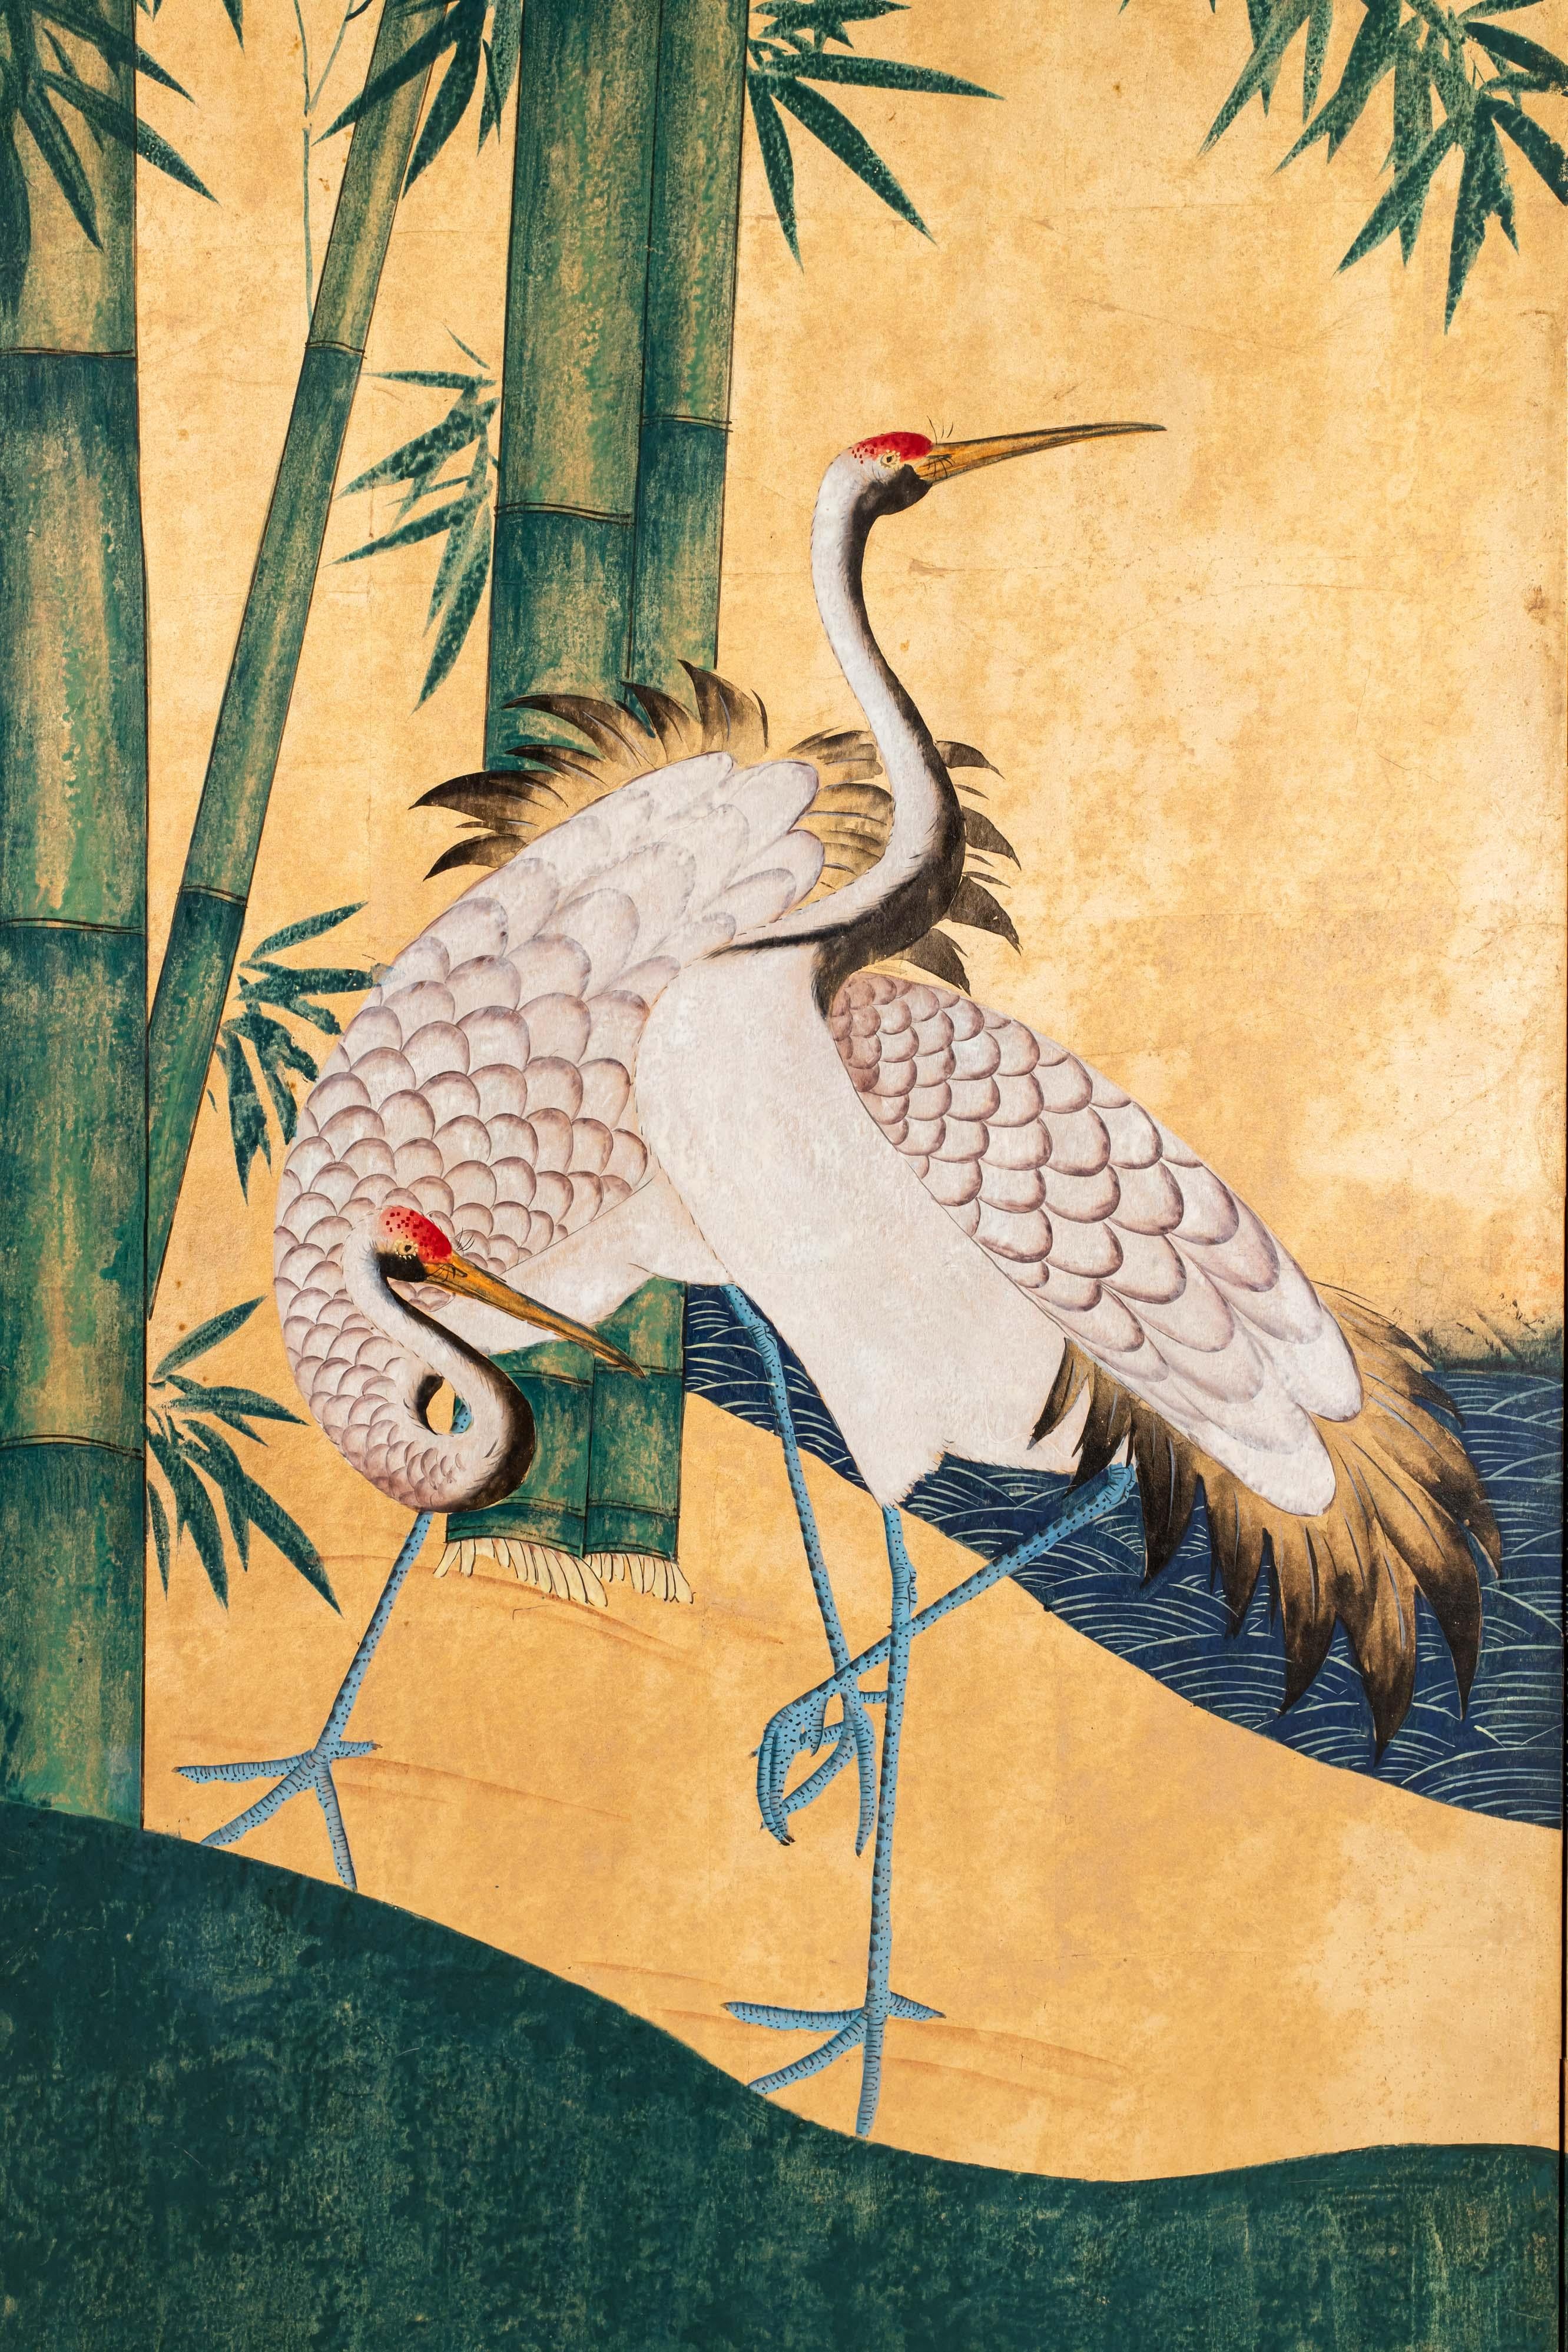 Hand-Crafted Contemporary Hand-Painted Japanese Screen of Cranes by the River For Sale